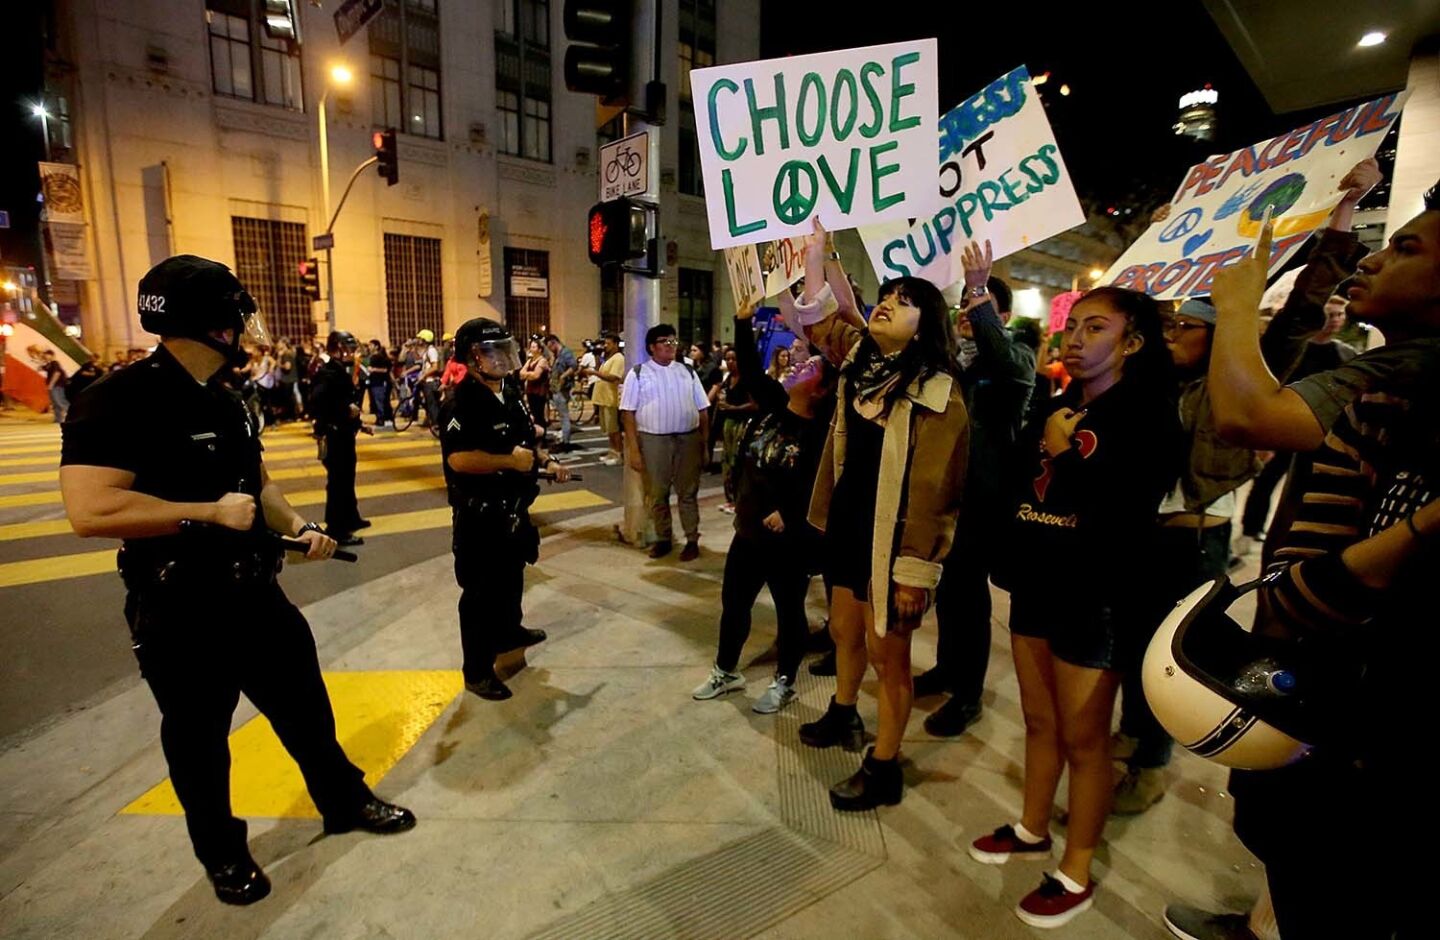 Protesters chant and wave signs as LAPD officers halt their march through downtown Los Angeles.